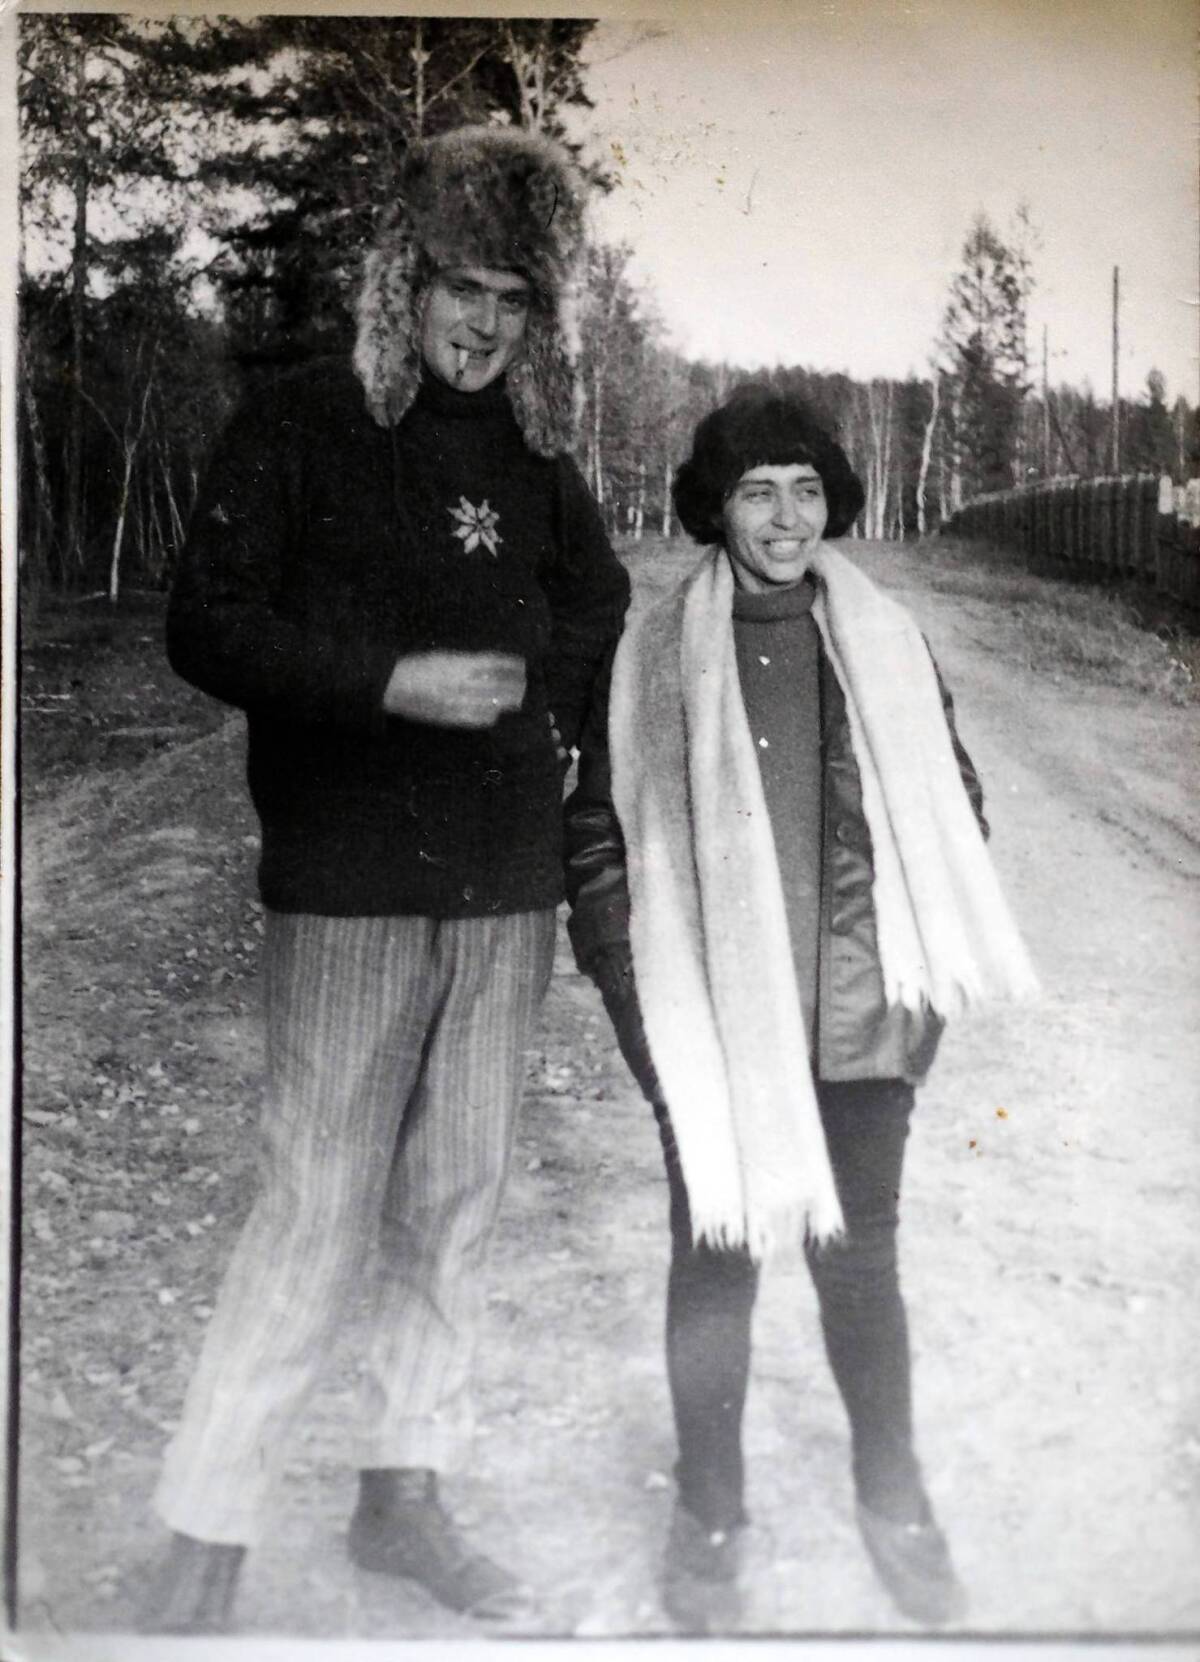 Dima and Lara Litvinov’s parents, Pavel and Maya, were dissidents in Russia. Pavel Litvinov was arrested in 1968 and exiled with his family to a Siberian mining town.